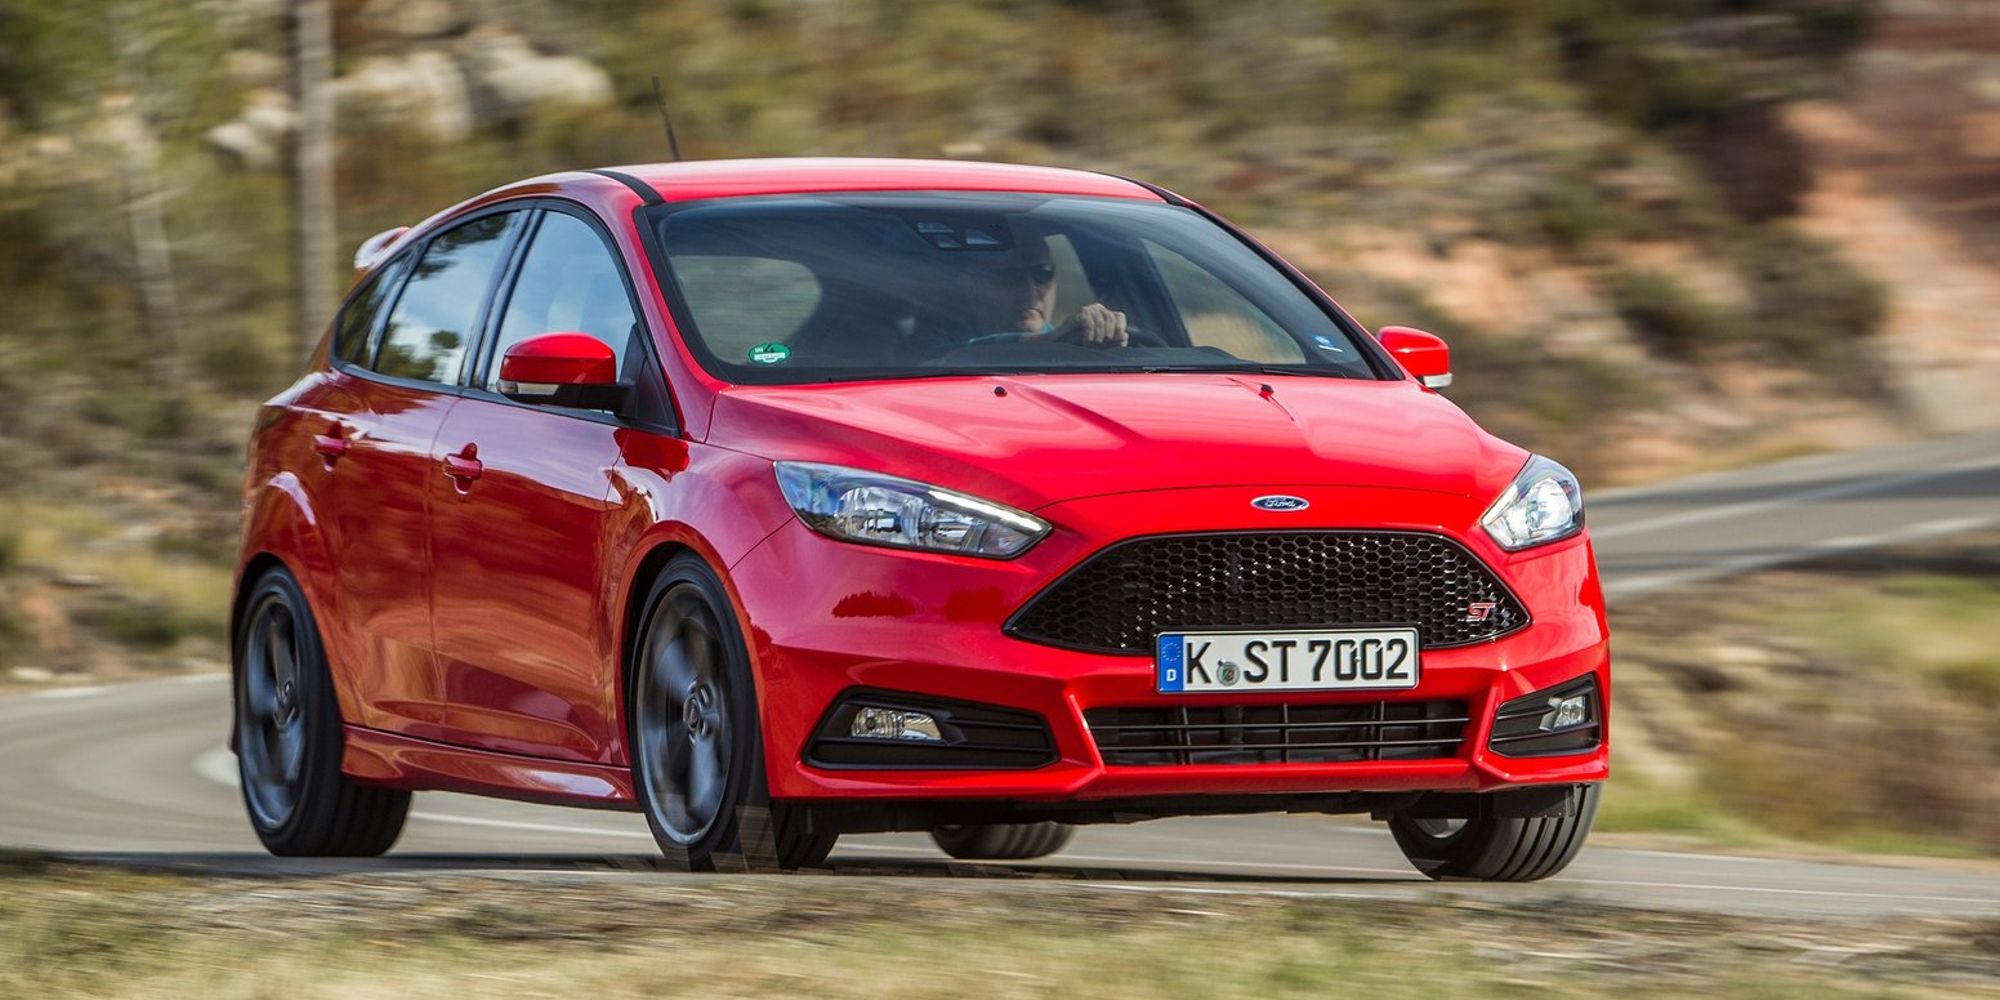 The front of a red Focus ST on the move